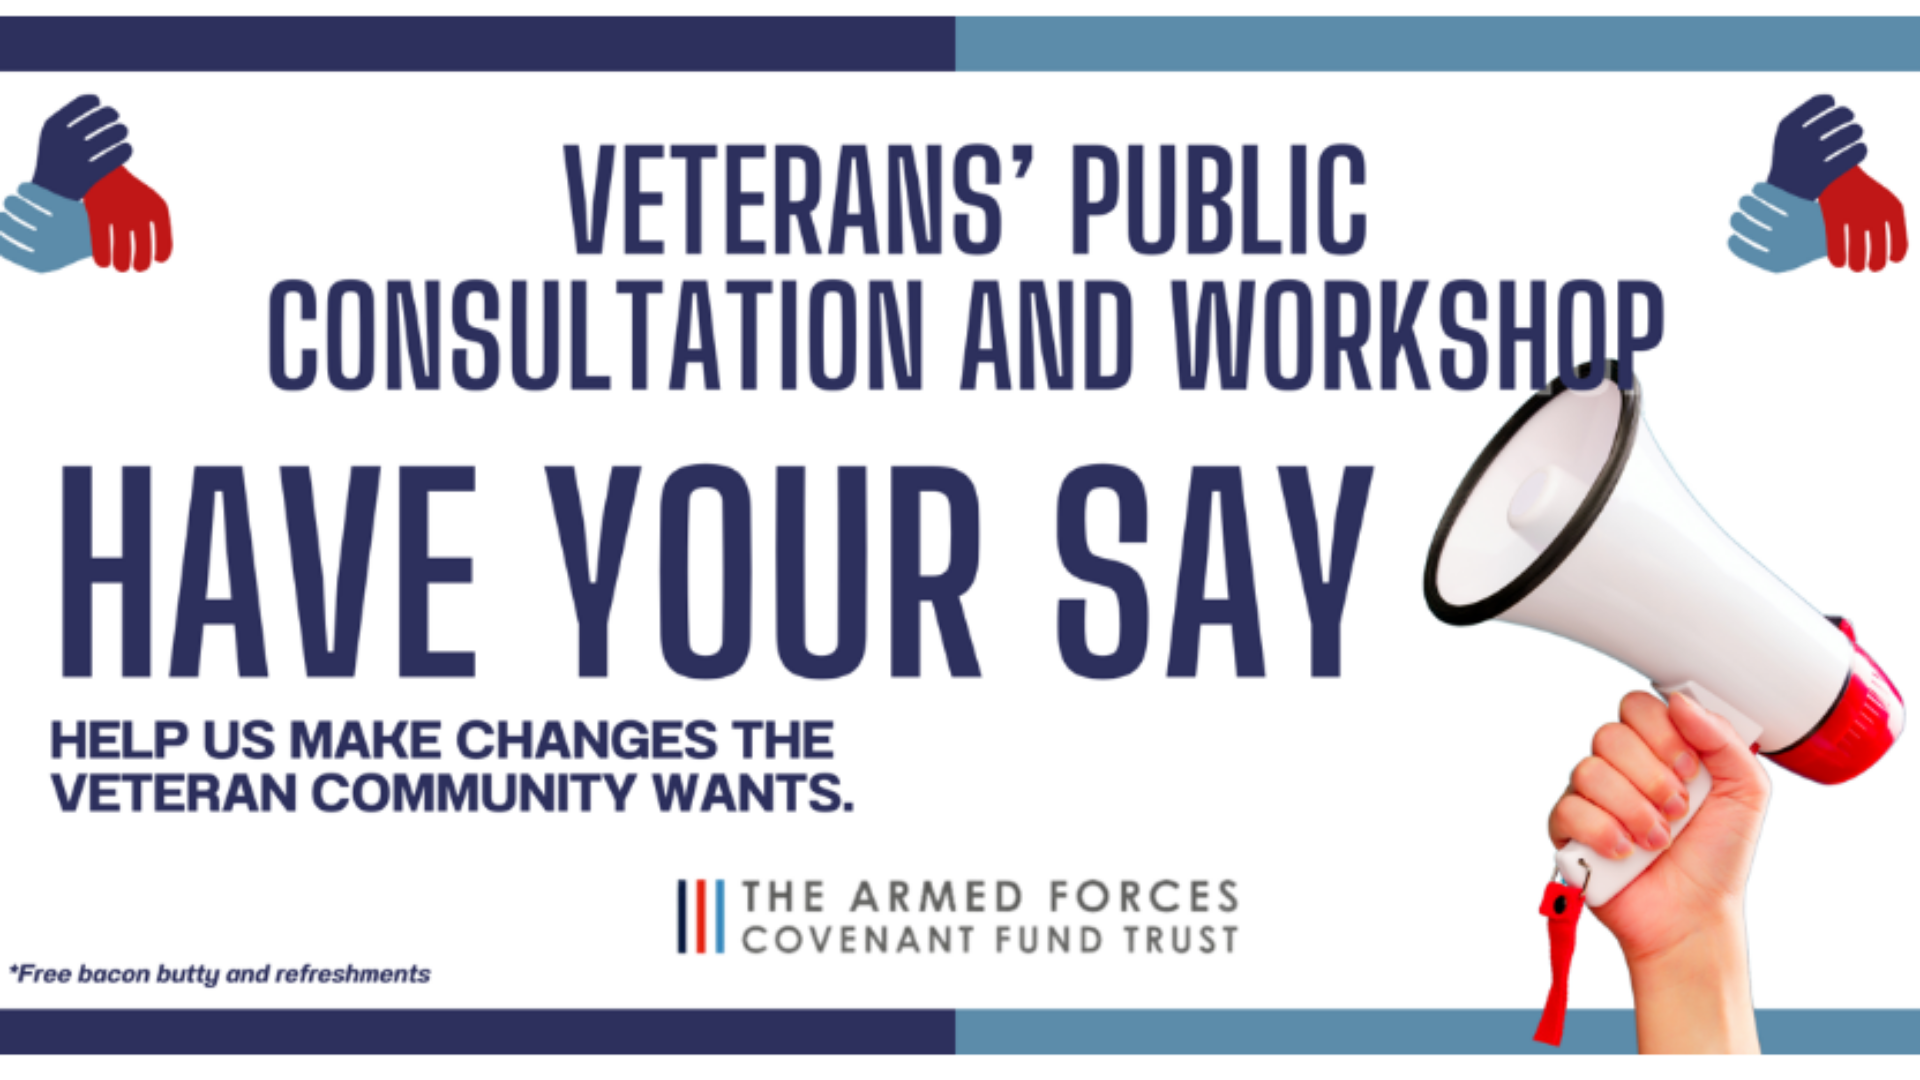 Veterans Outreach Support is undertaking a Consultation